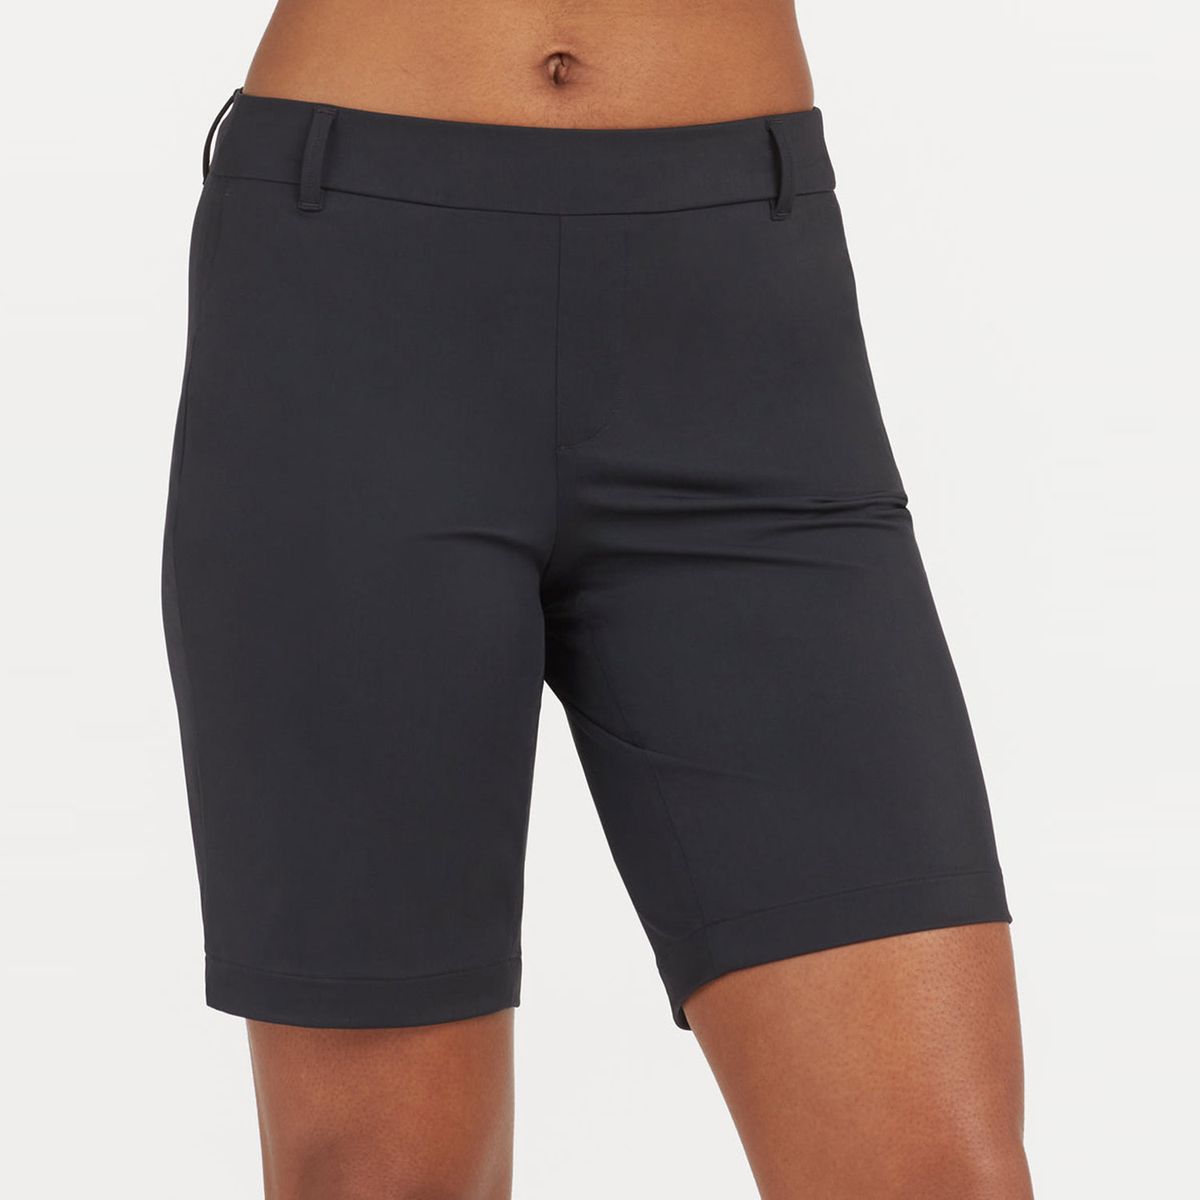 Spanx Best-selling Shorts